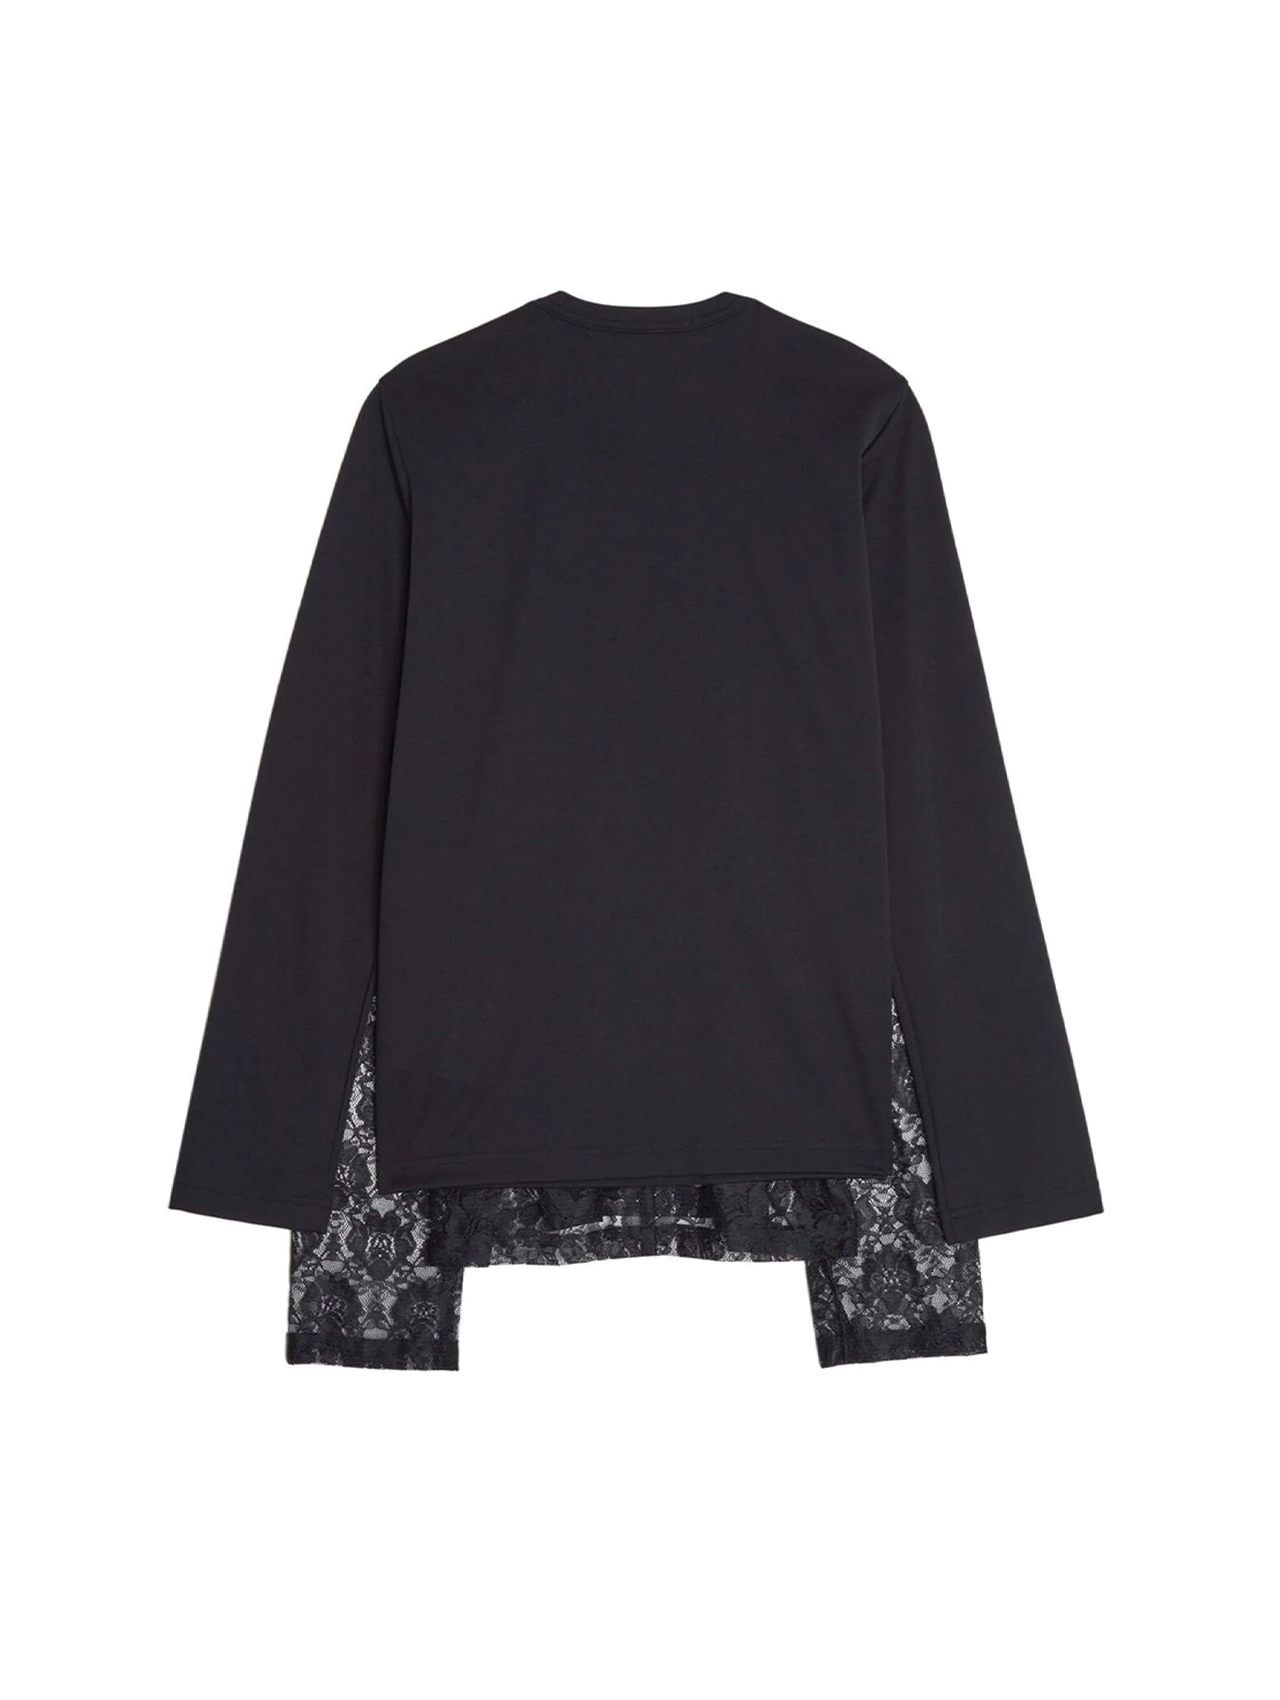 CDG CDG Black Lace Layered Top